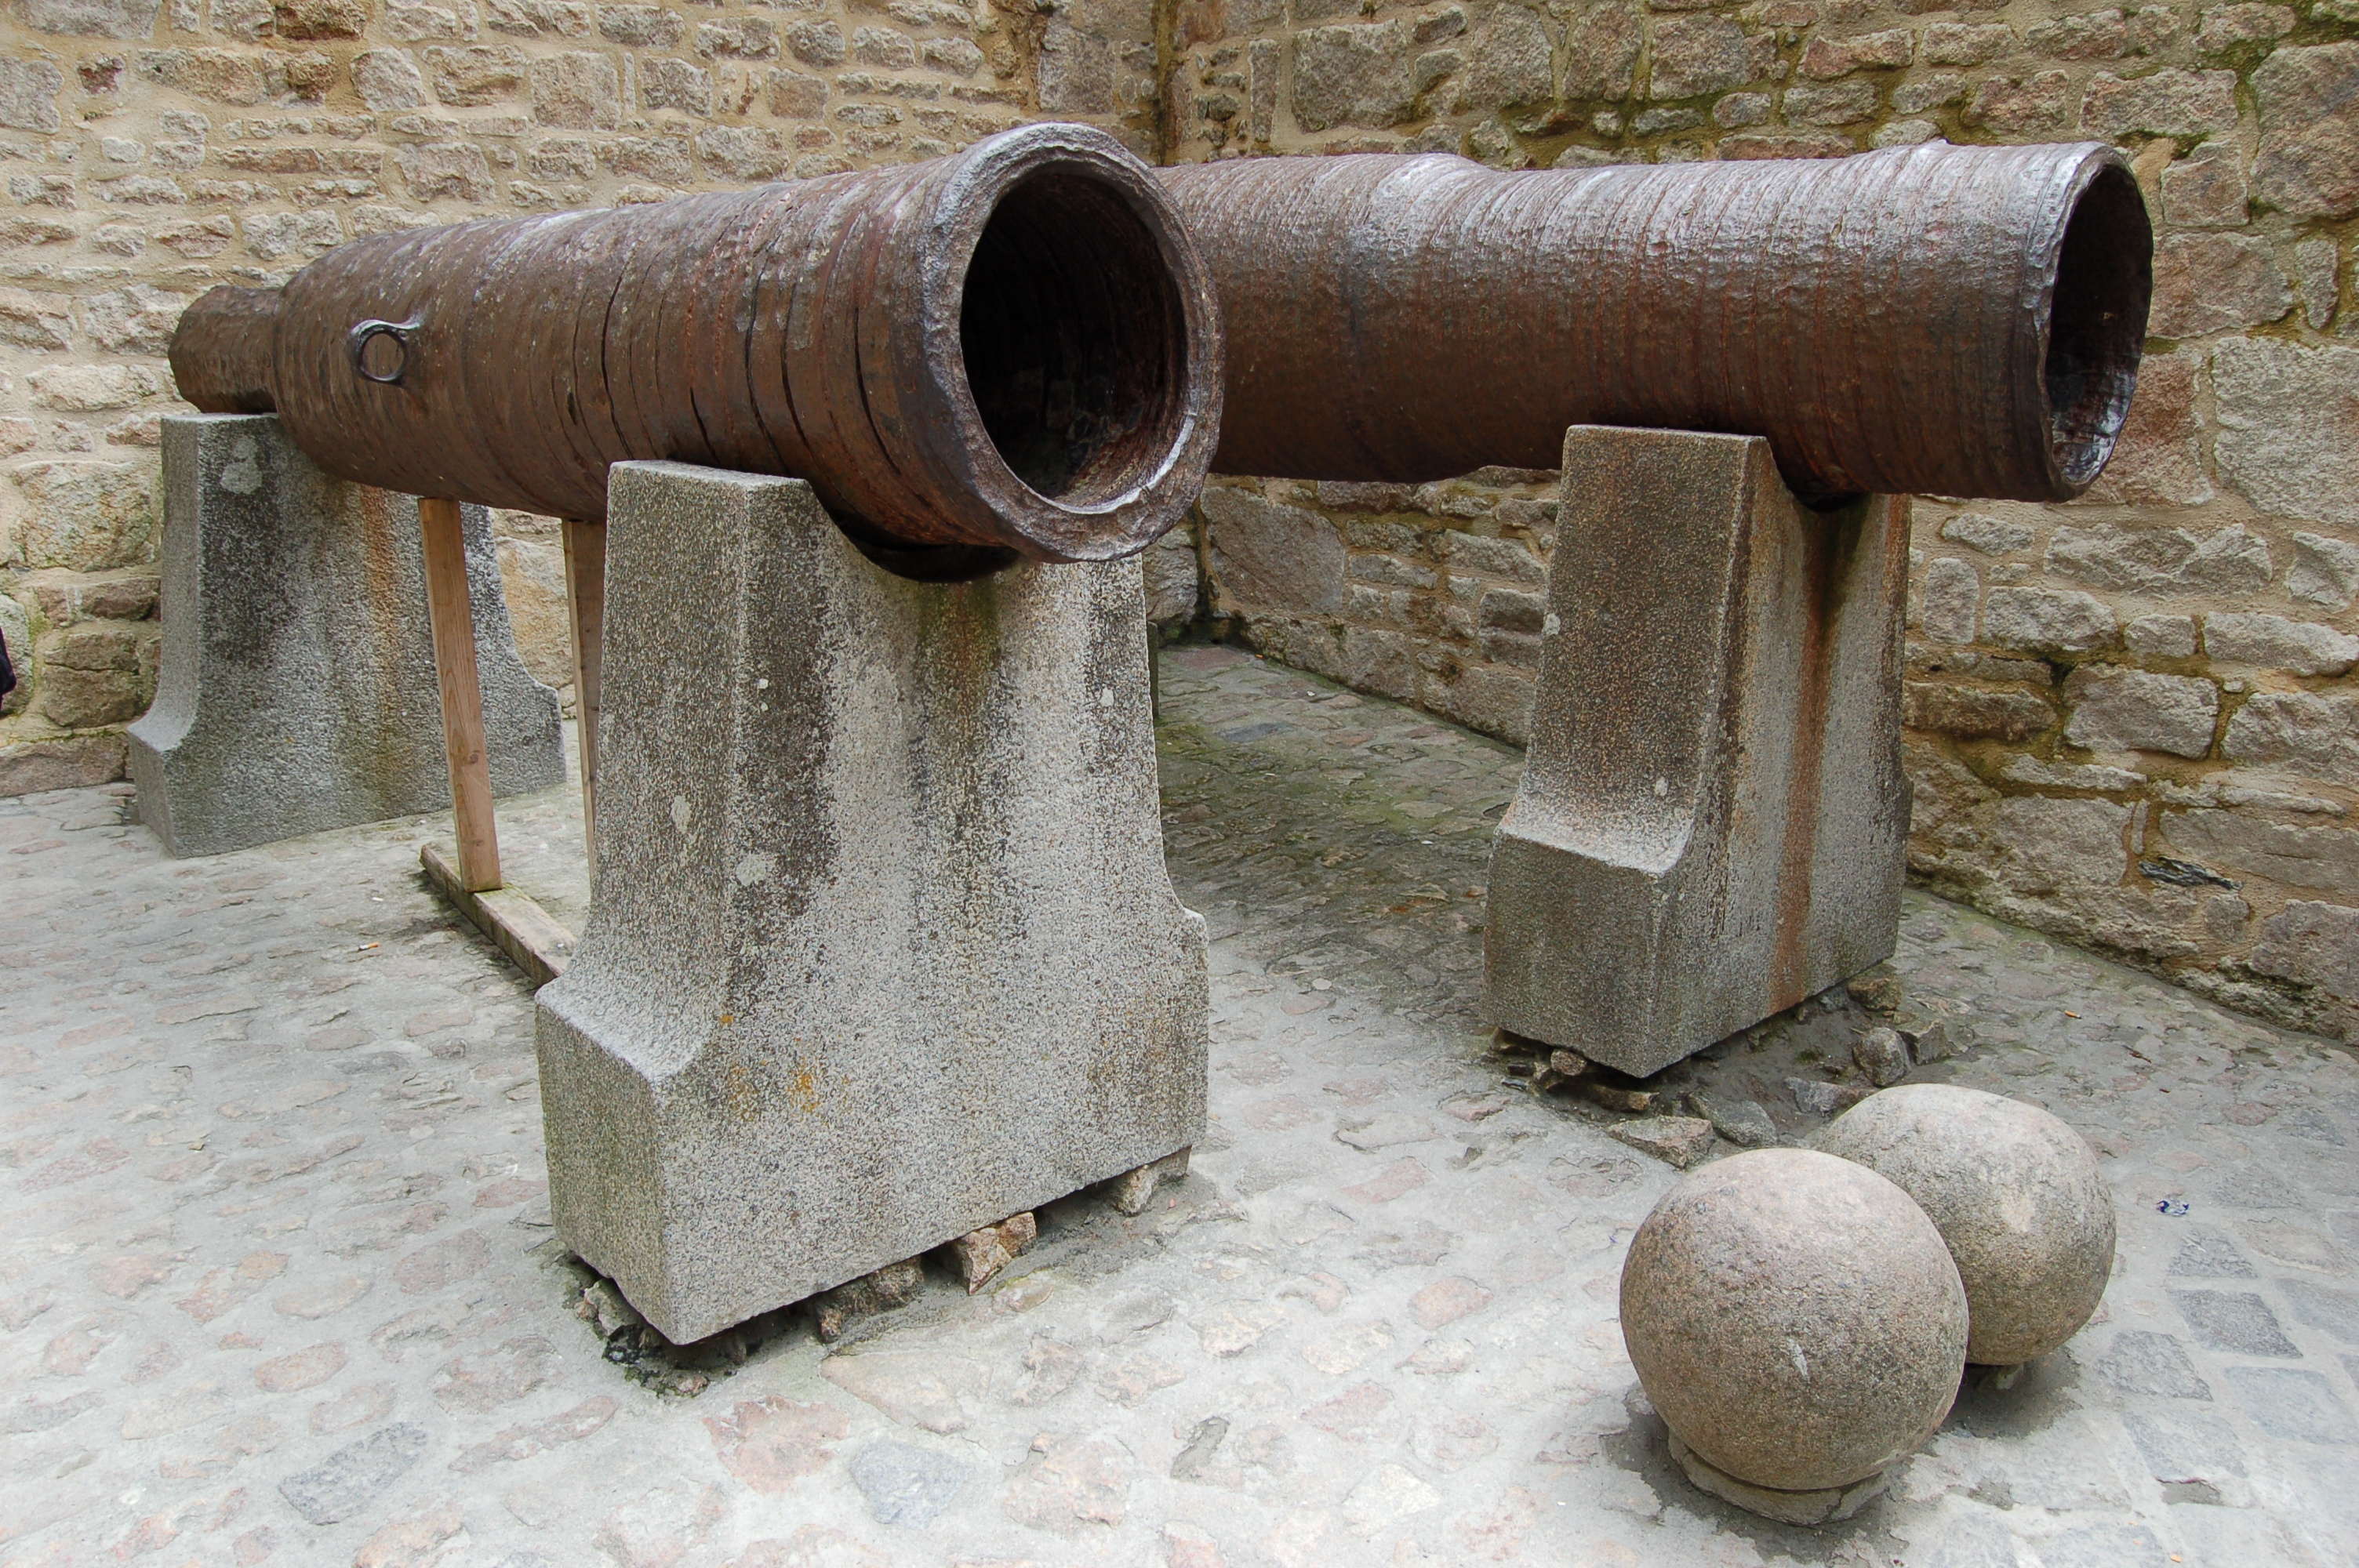 Cannons_abandonded_by_Thomas_Scalles_at_Mont_Saint-Michel.jpg